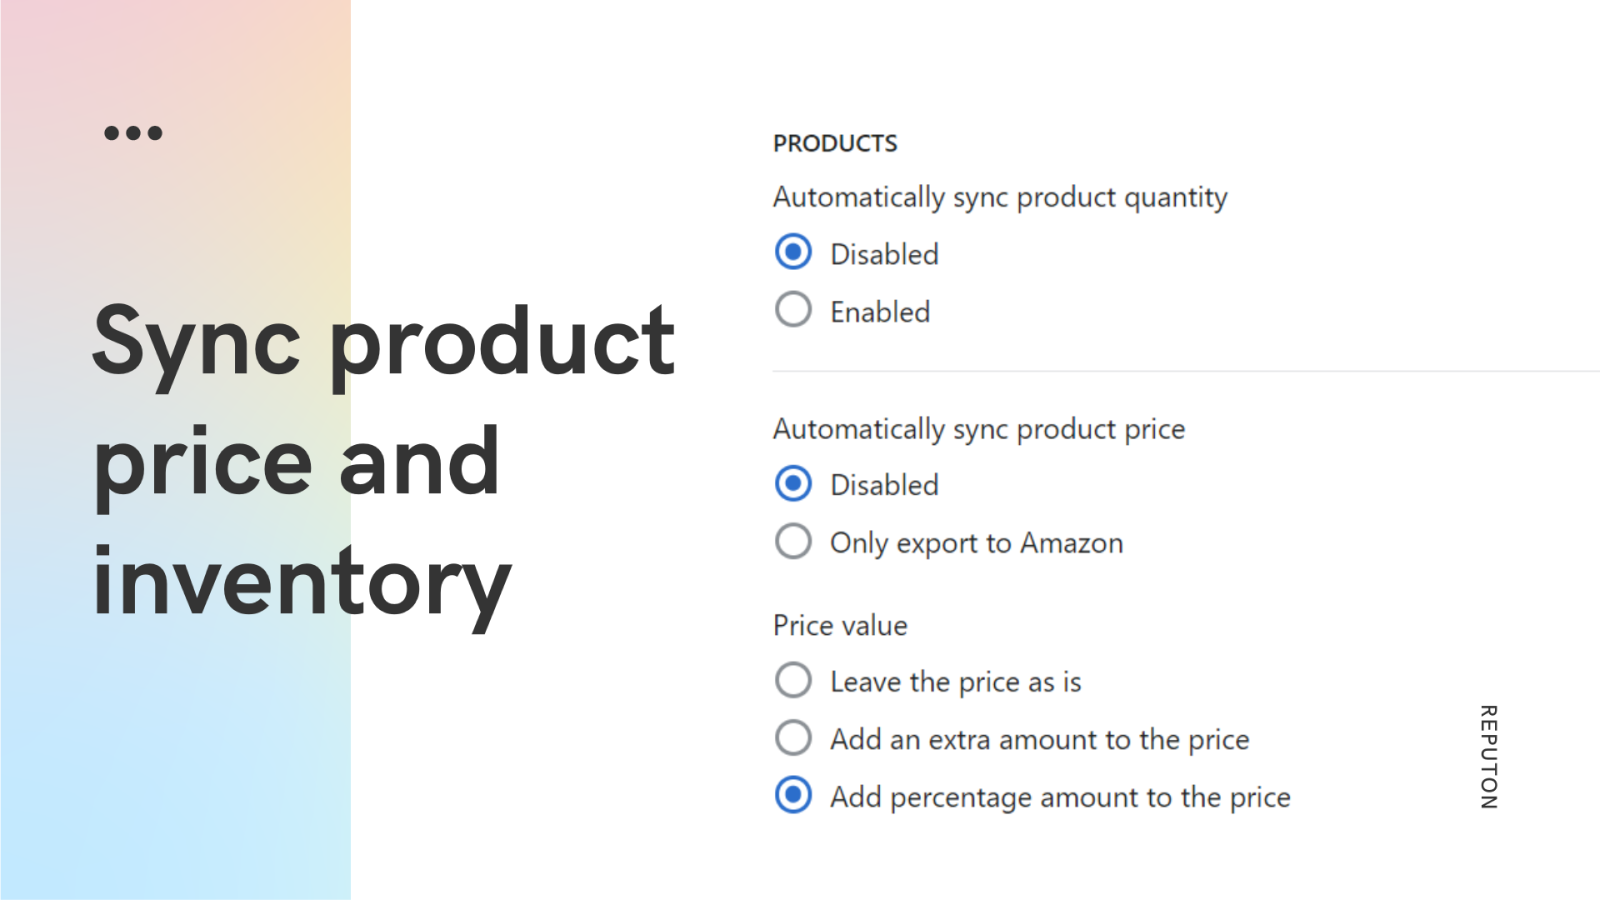 Sync product price and inventory